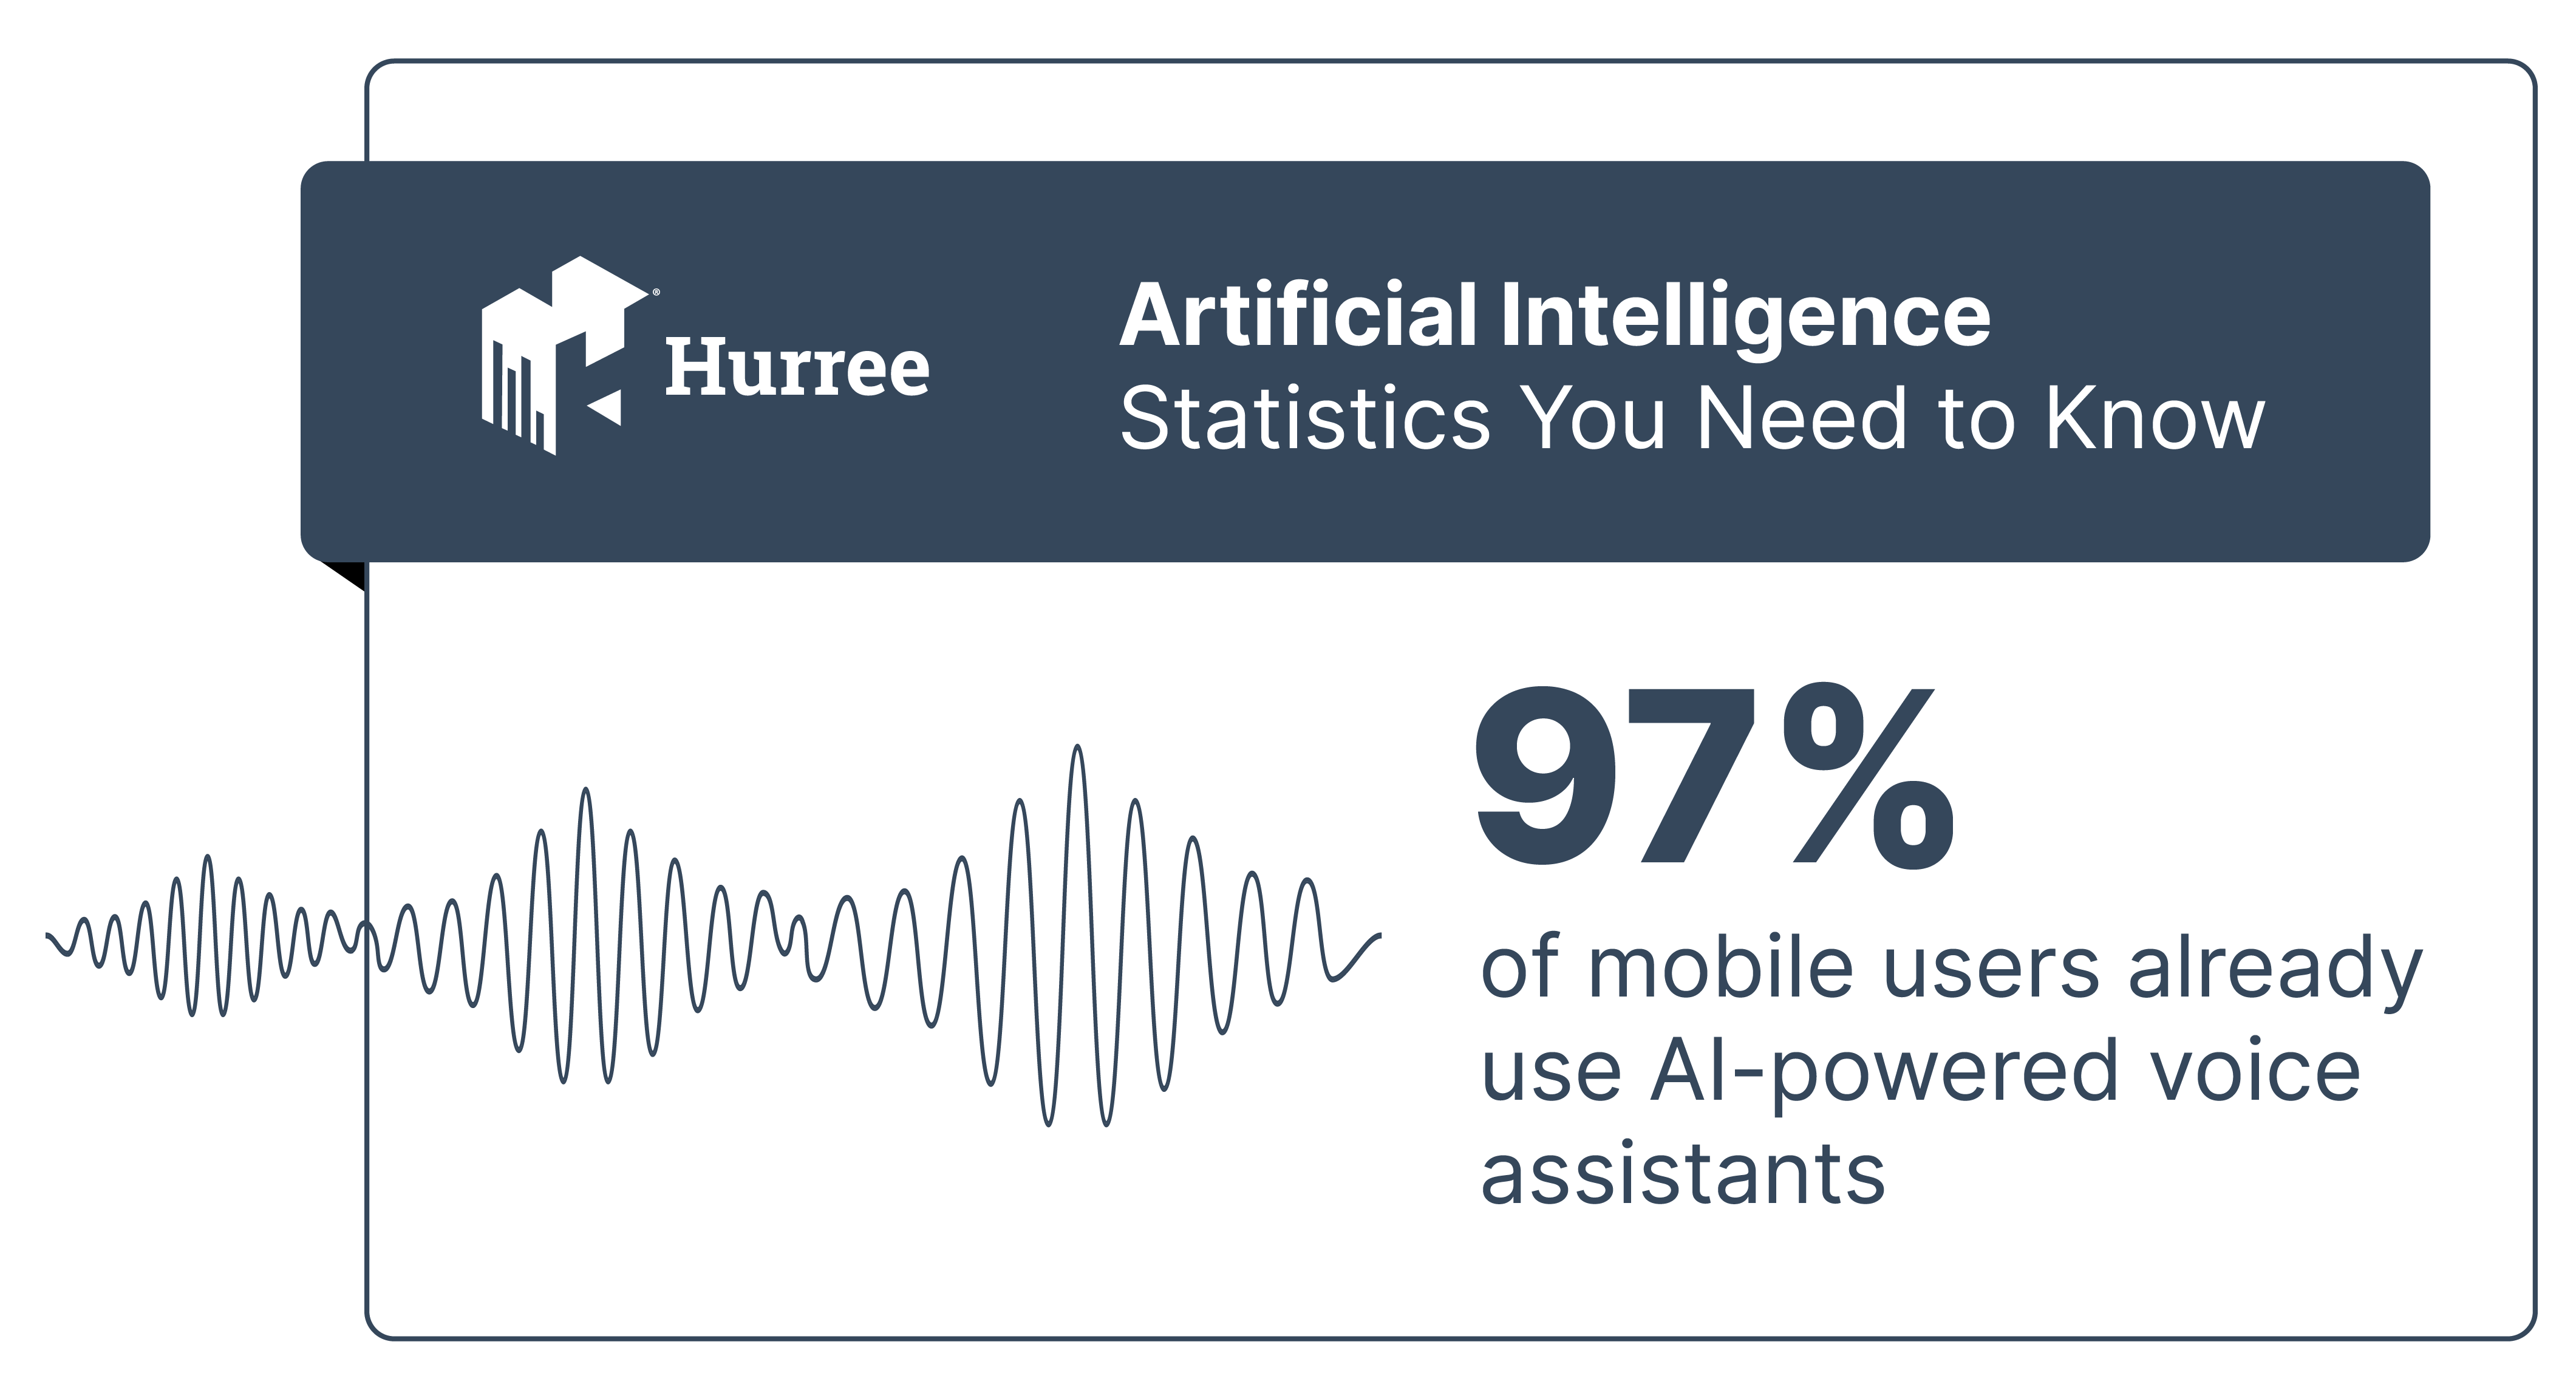 97% of mobile users already use AI-powered voice assistants